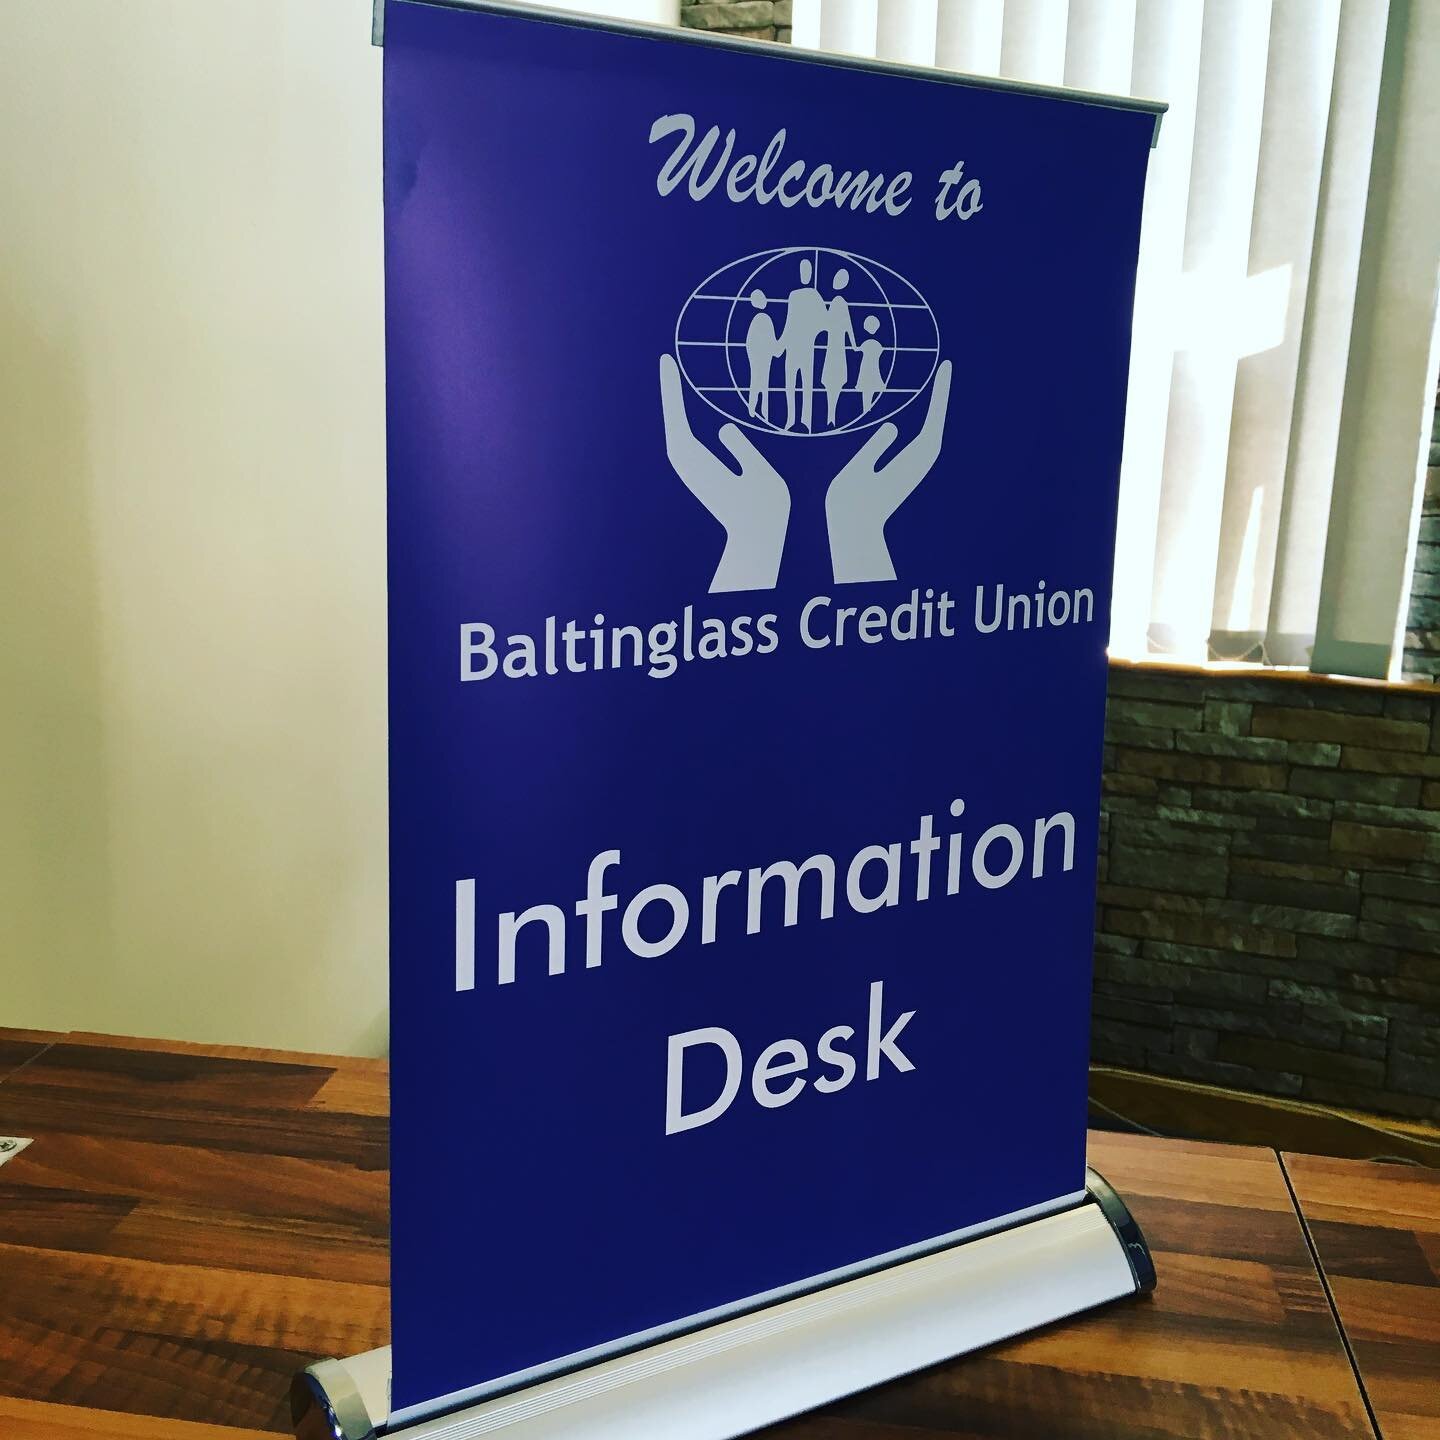 Have a look at these cool miniature pull up banners! 
From as little as &euro;35 you can spruce up your reception desk with an easy to use pull up display! 
Call us today!
#graphics #signage #pullupbanners